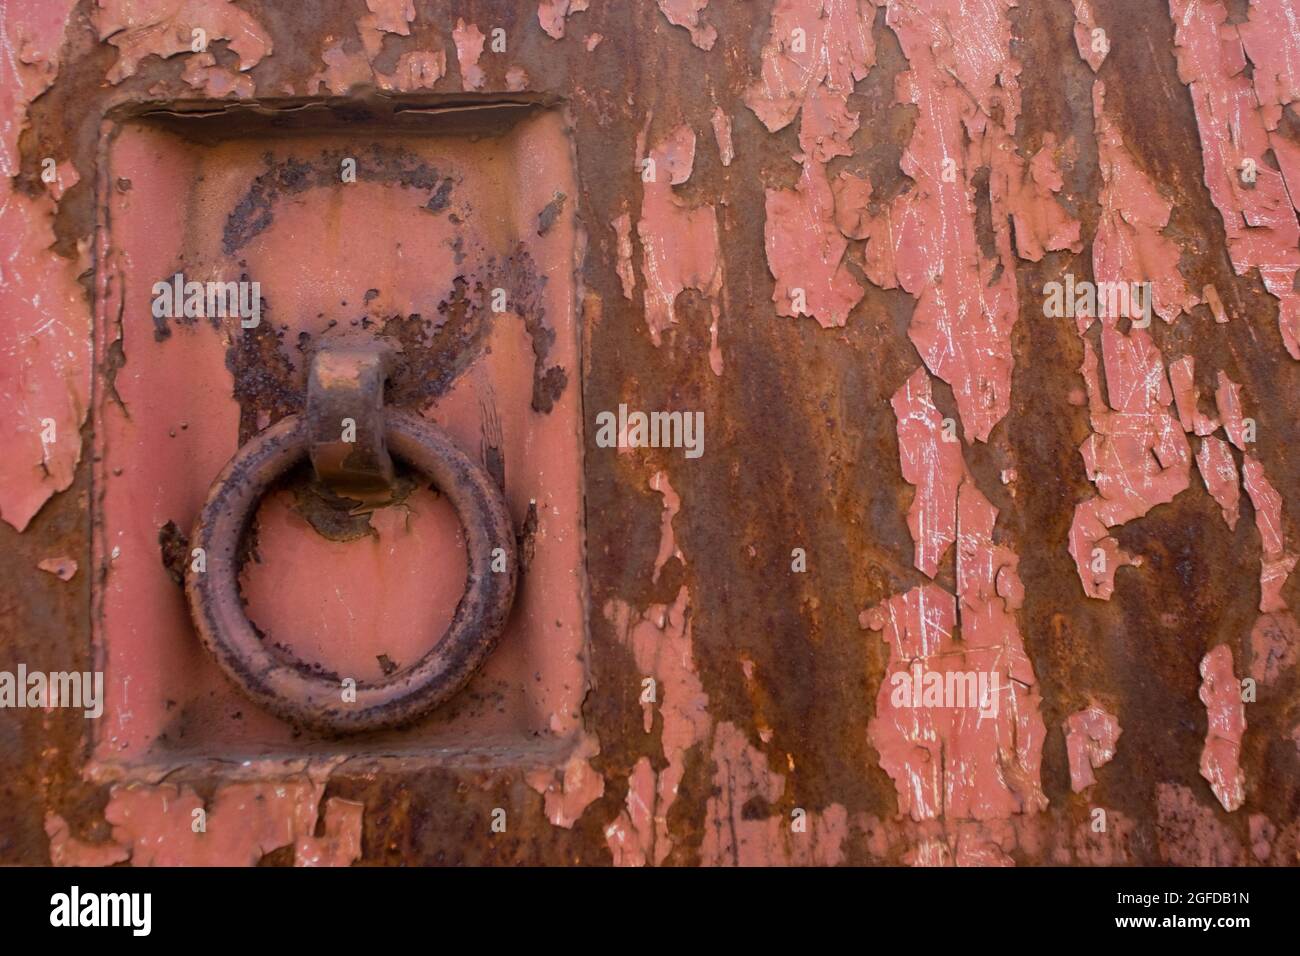 Rust layers, structured weathered iron surface. Stock Photo